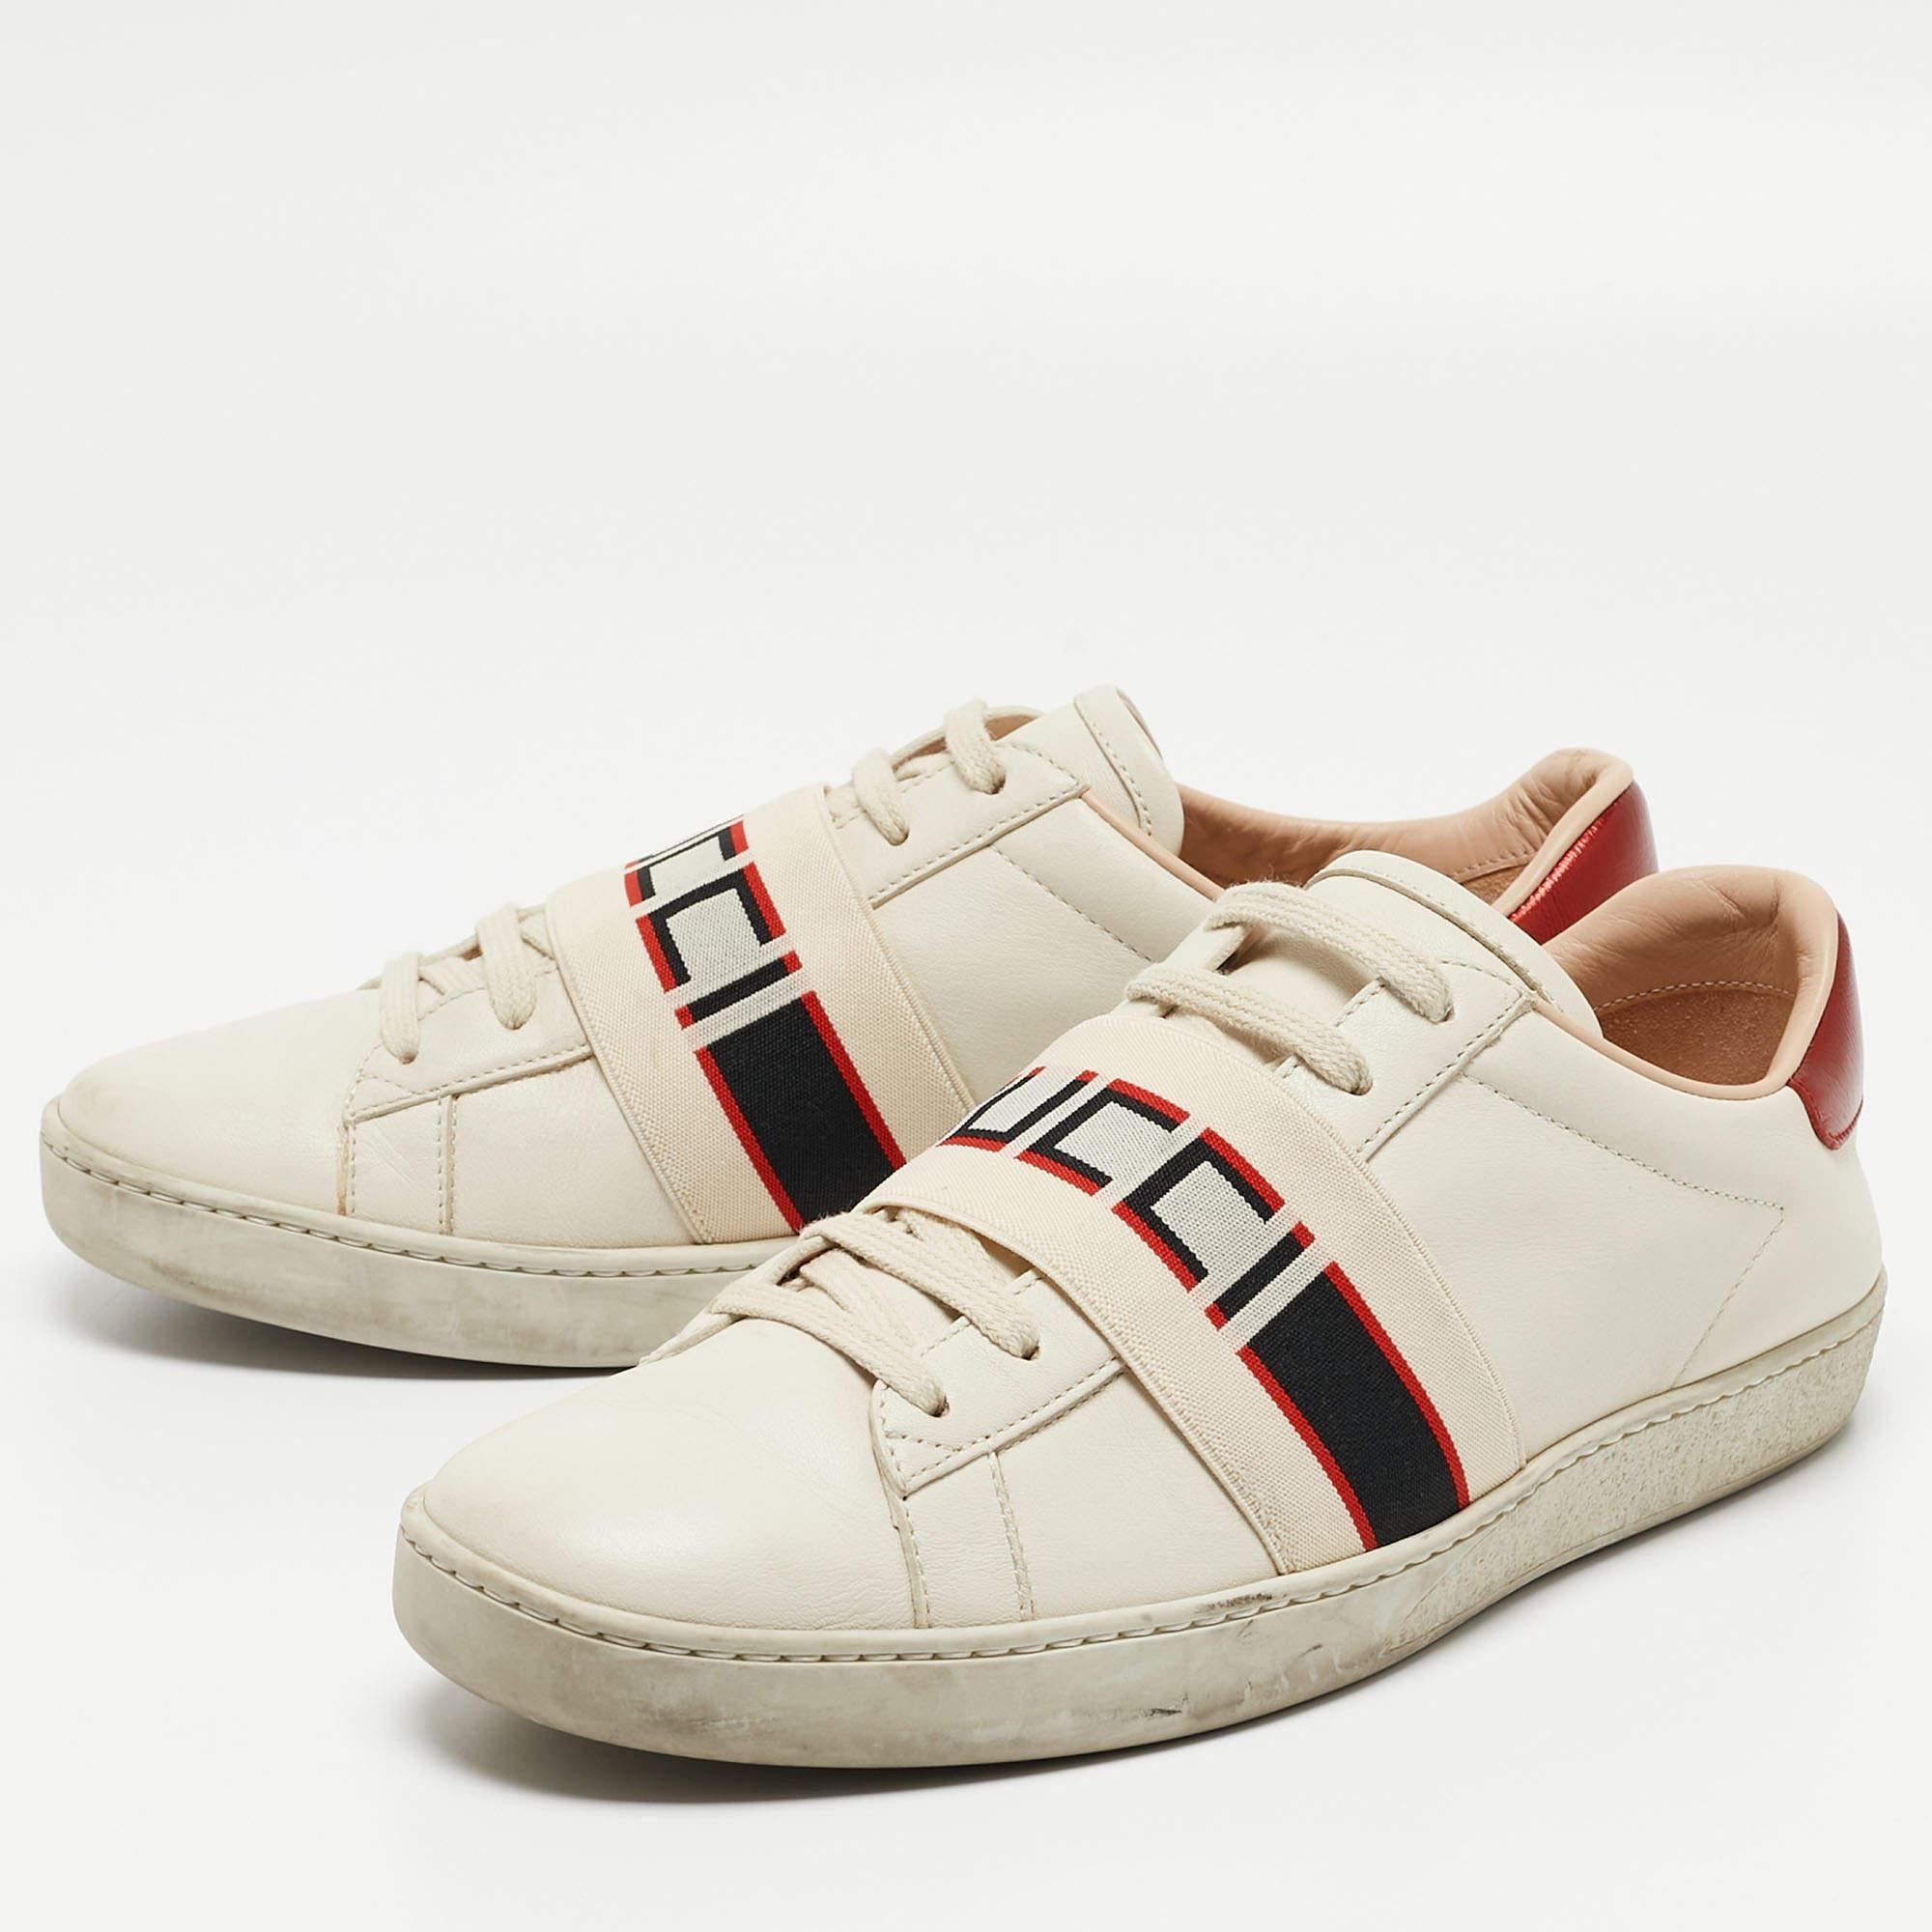 Gucci Off White/Red Leather Ace Stripe Sneakers Size 39 For Sale 3